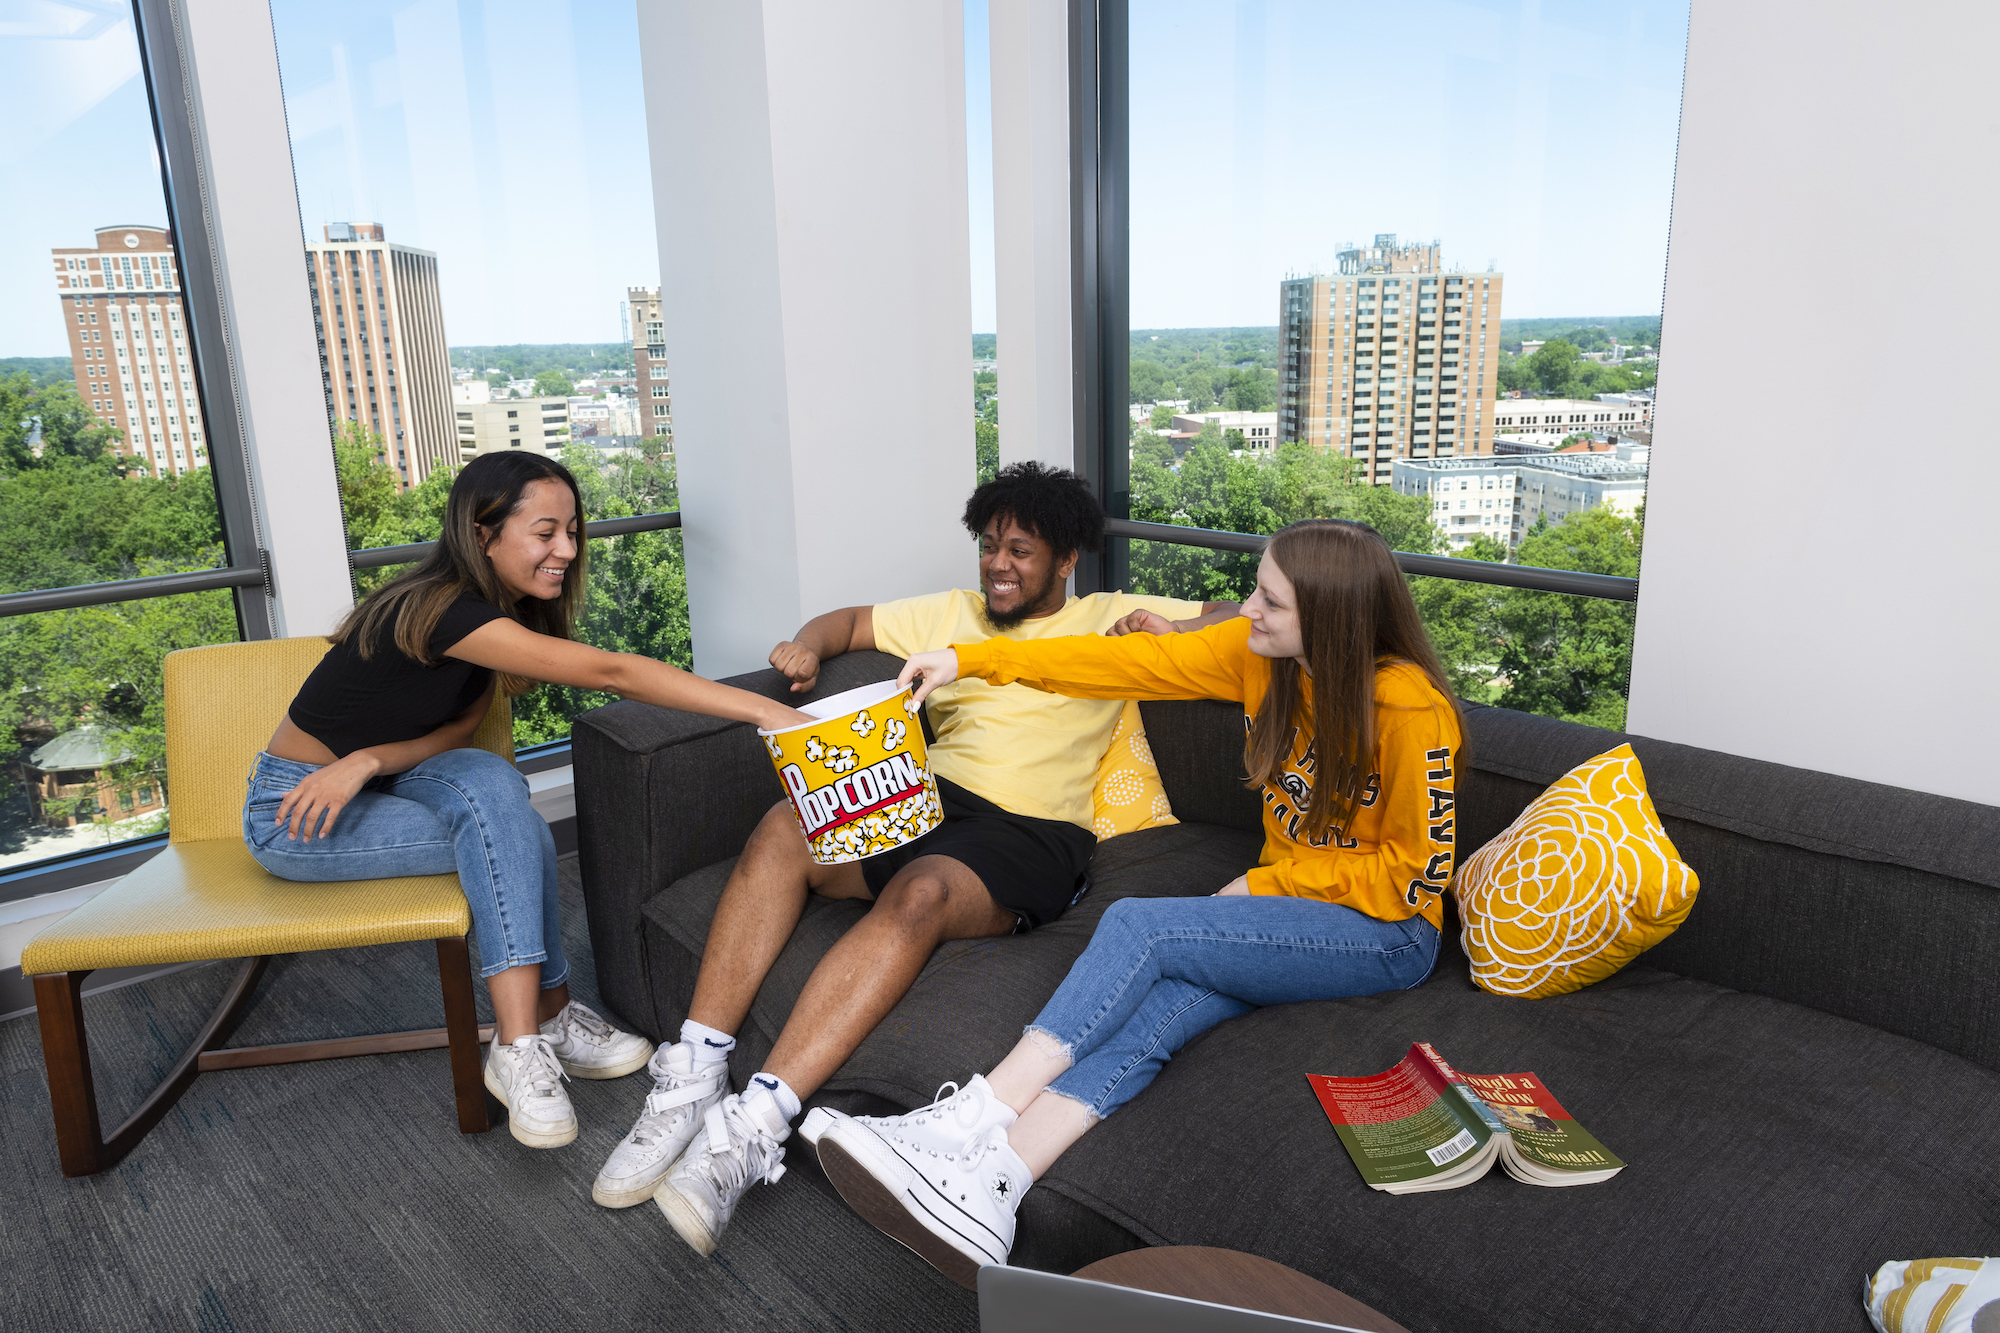 Residents sharing popcorn in a GRC common area with windows behind overlooking campus